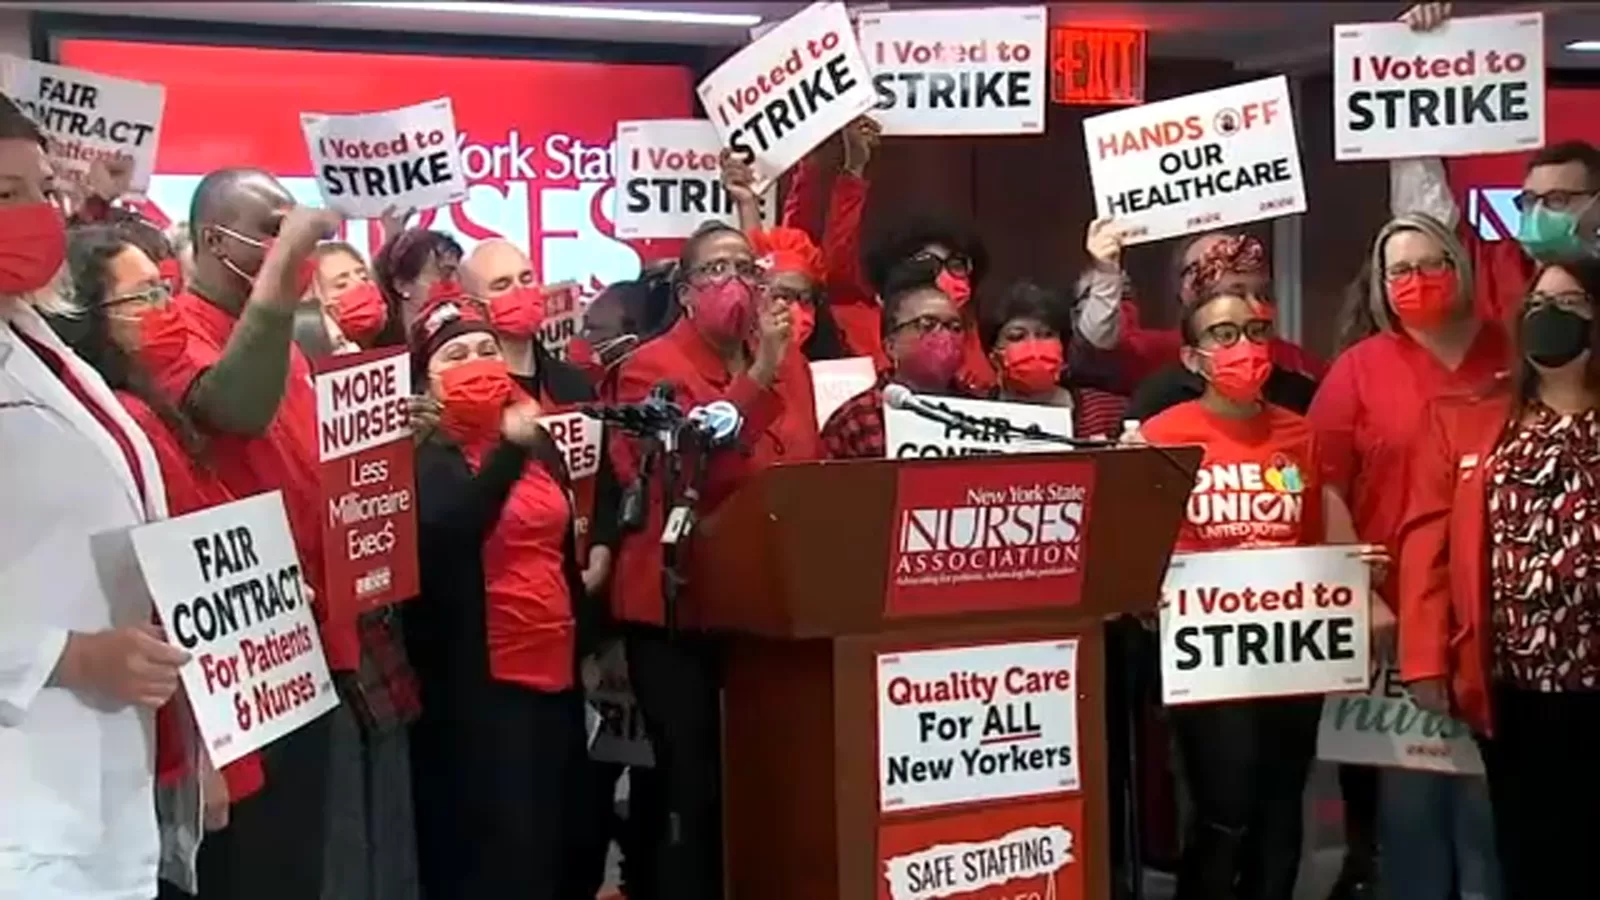 16,000 NY nurses at 8 local hospitals plan to strike in 10 days if union contract negotiations are not reached